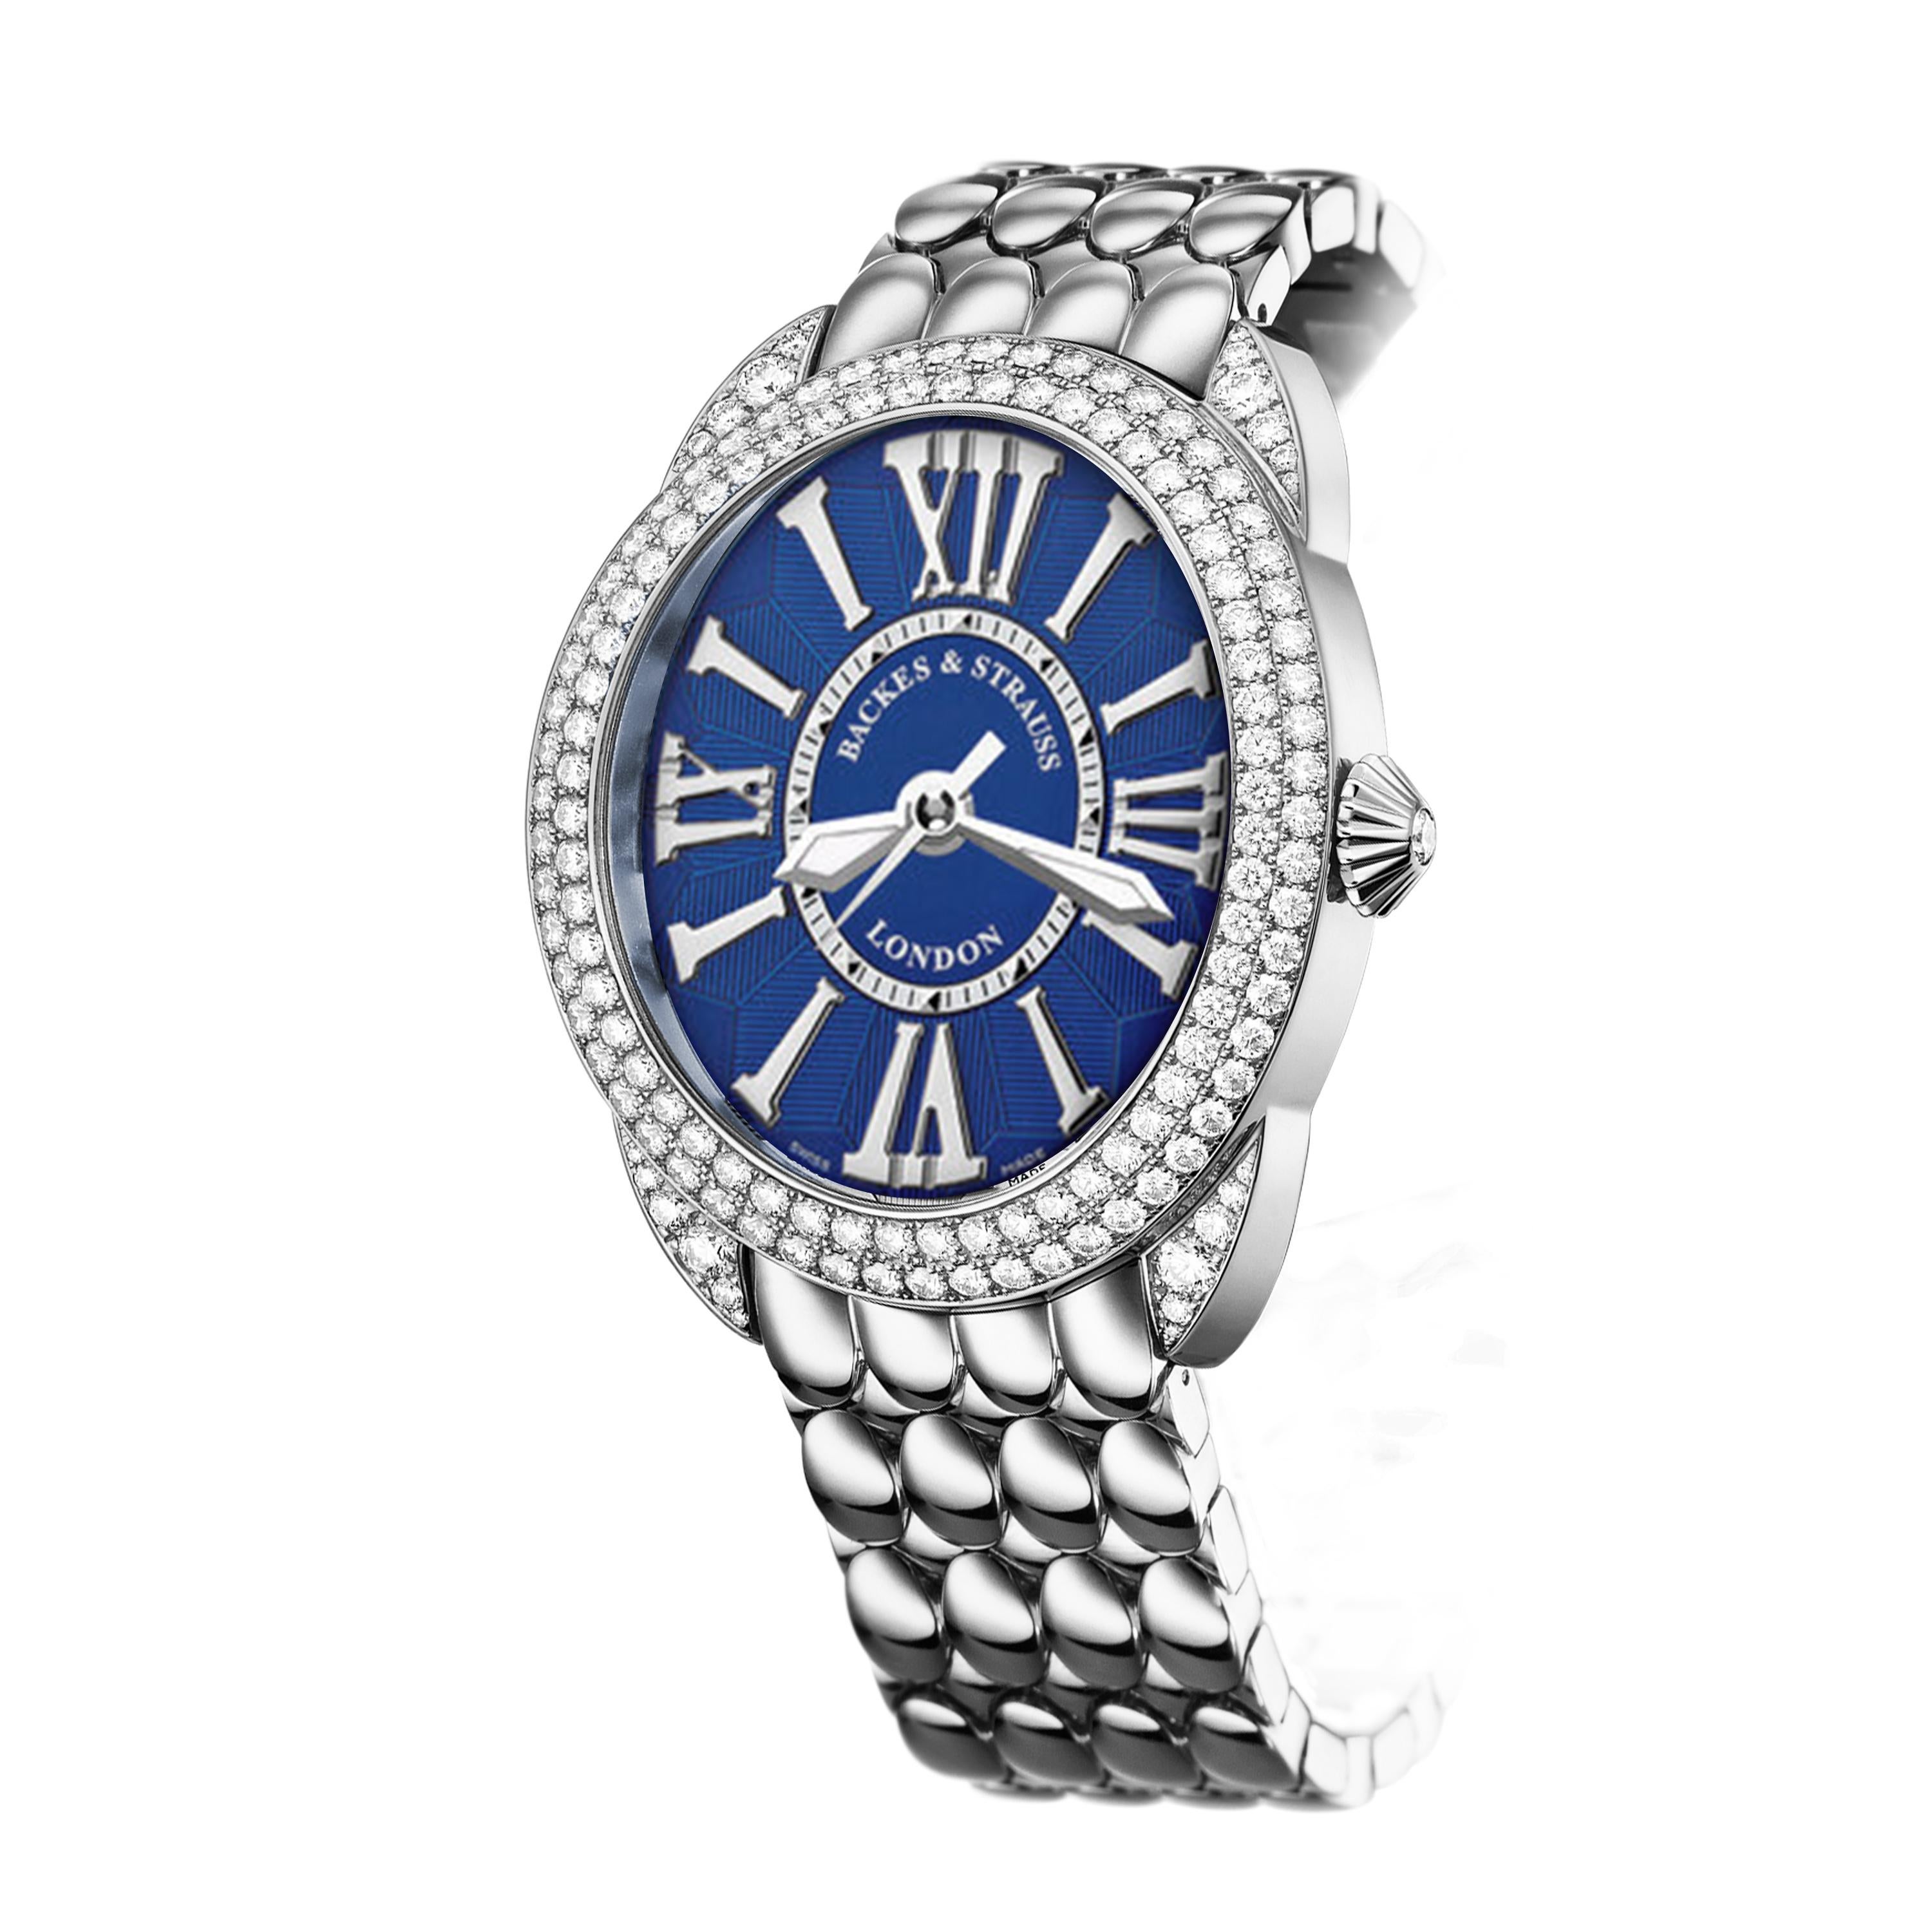 Regent Steel 3238 is a luxury diamond watch for women crafted in Stainless Steel, featuring a blue oval dial with steel Roman numerals, automatic movement. The case and crown are set with white Ideal Cut diamonds. It is a 32 mm x 38 mm casual watch